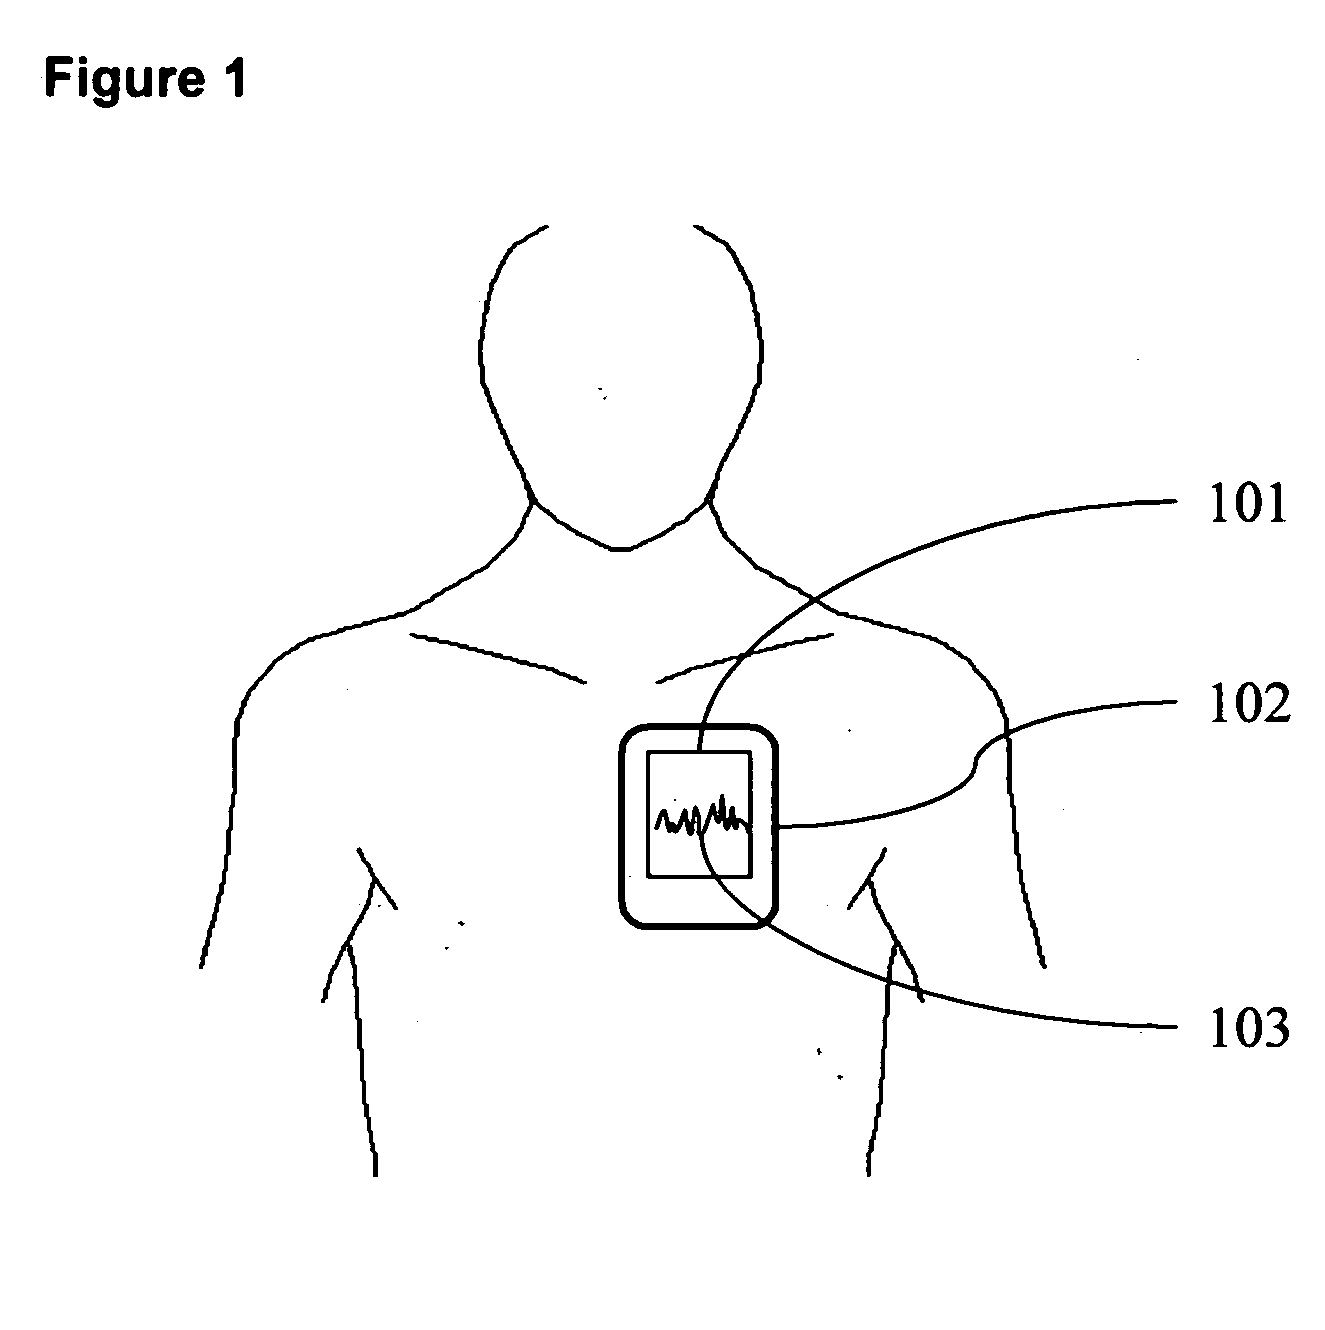 Physiological data recording apparatus for single handed application